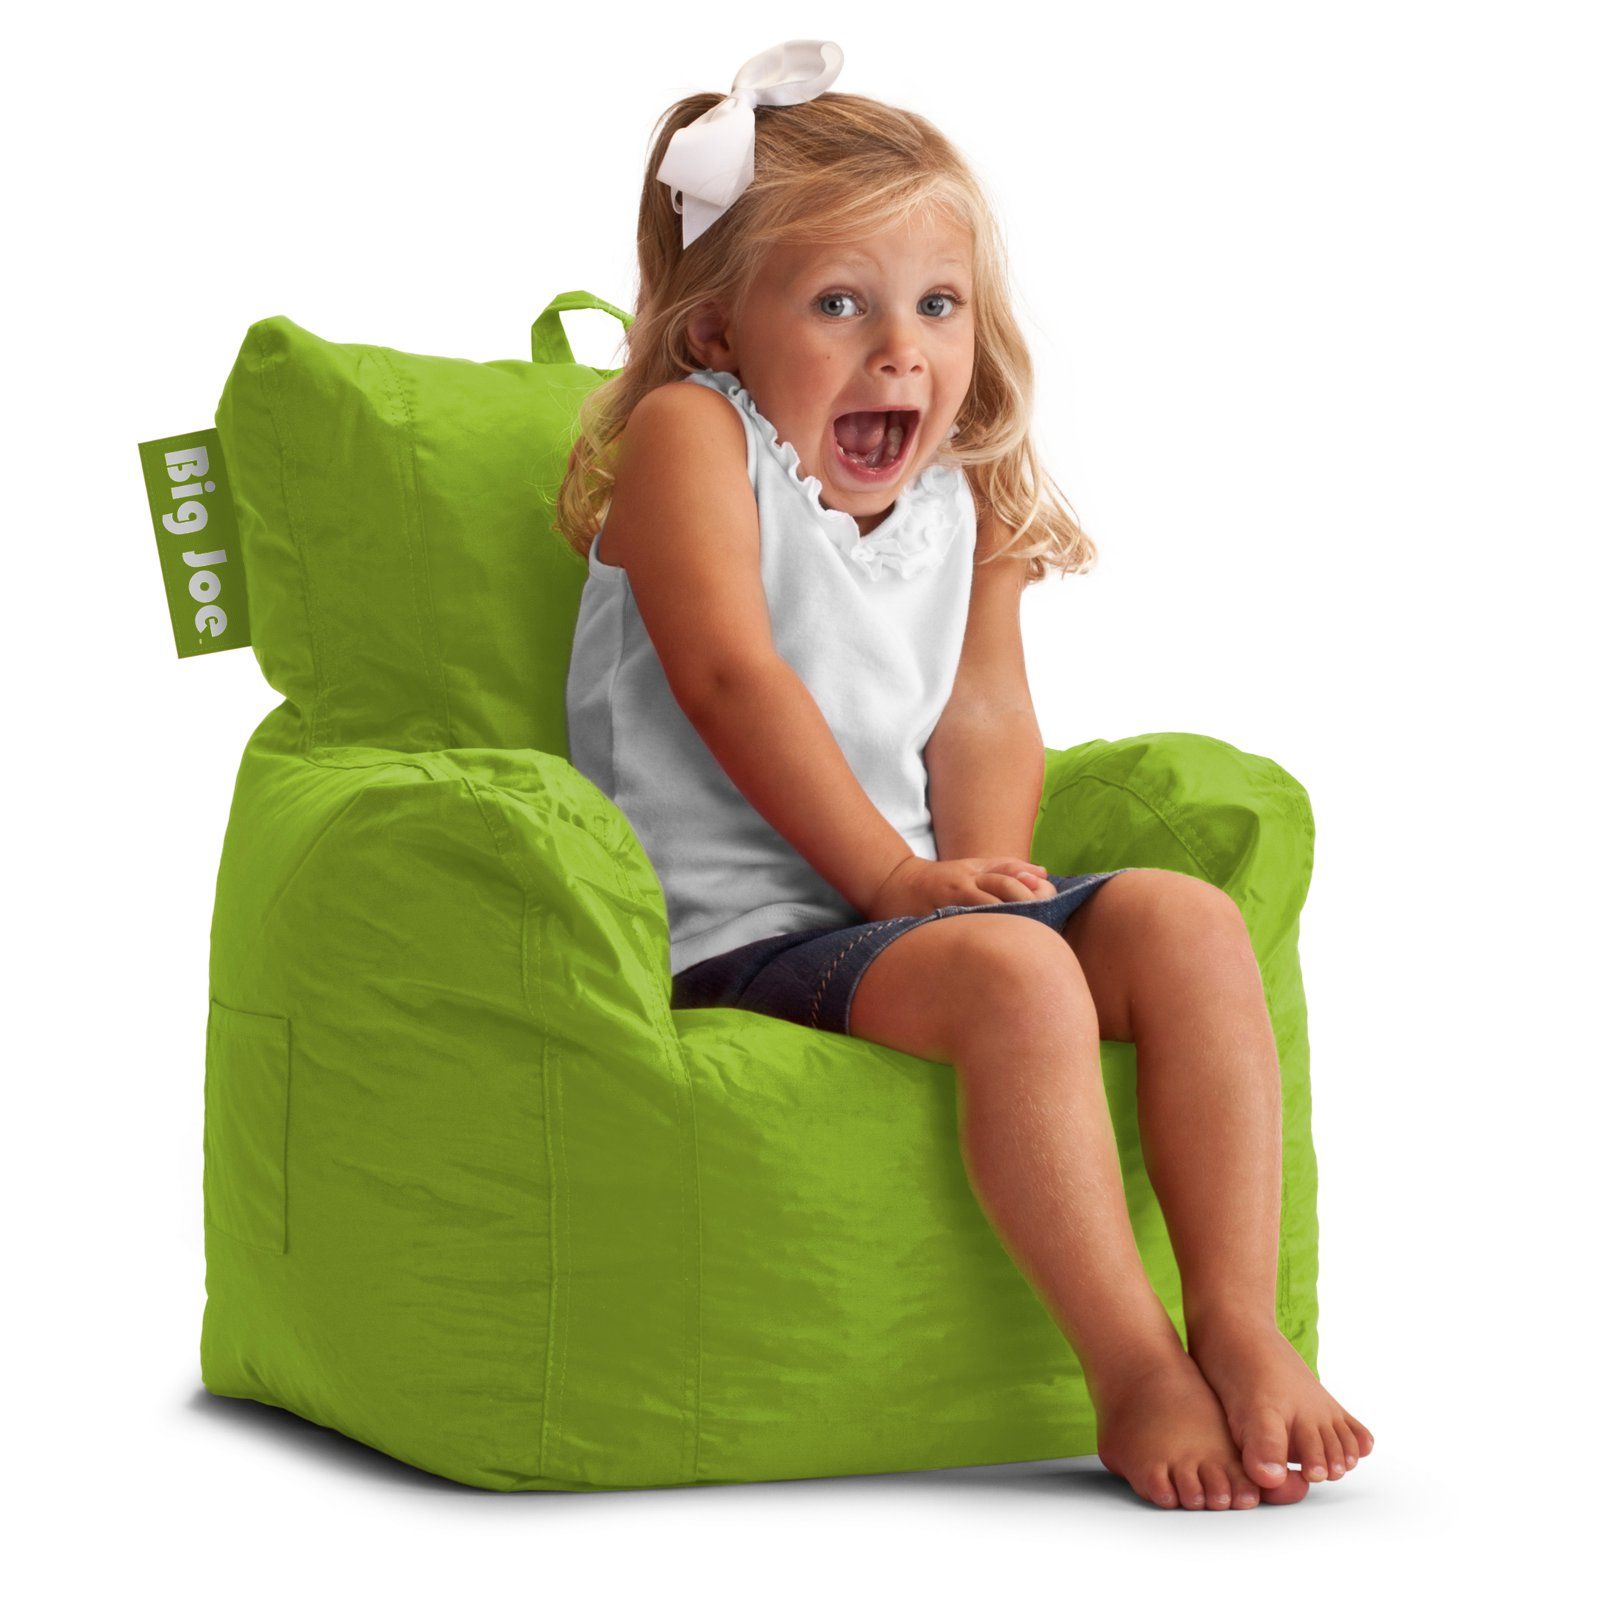 Big Joe Cuddle Bean Bag Chair, Multiple Colors Intended For Big Joe Mobilite Velvet Rocking Chairs (View 16 of 20)